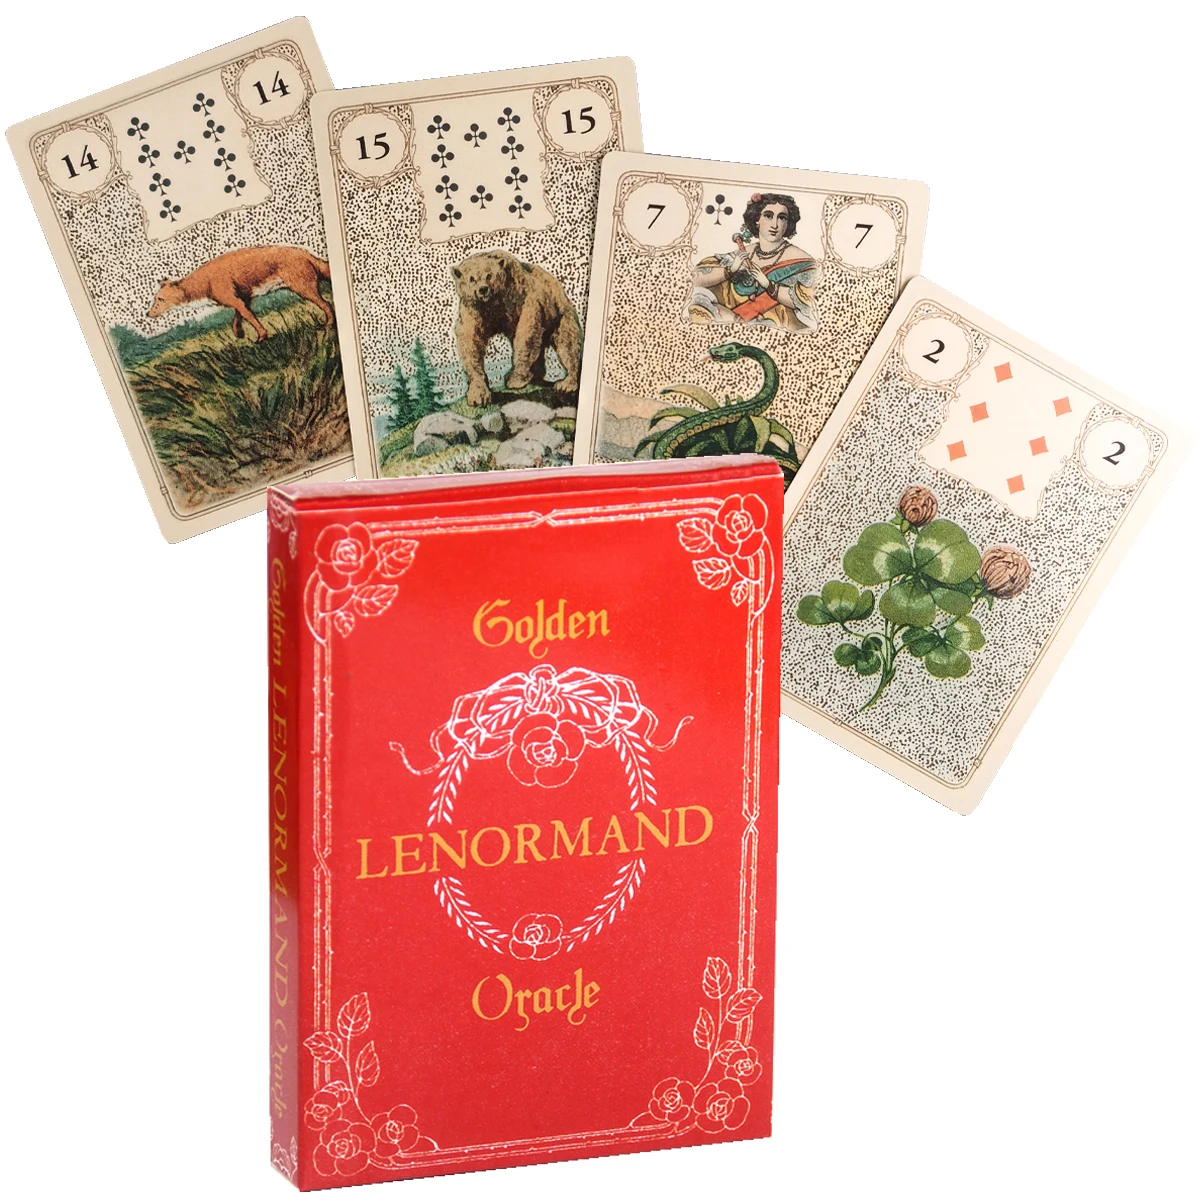 

Golden Lenormand Oracle Cards By Lo Scarabeo Fortune Telling Divination Tarot Deck Family Party Leisure Table Game PDF Guidebook